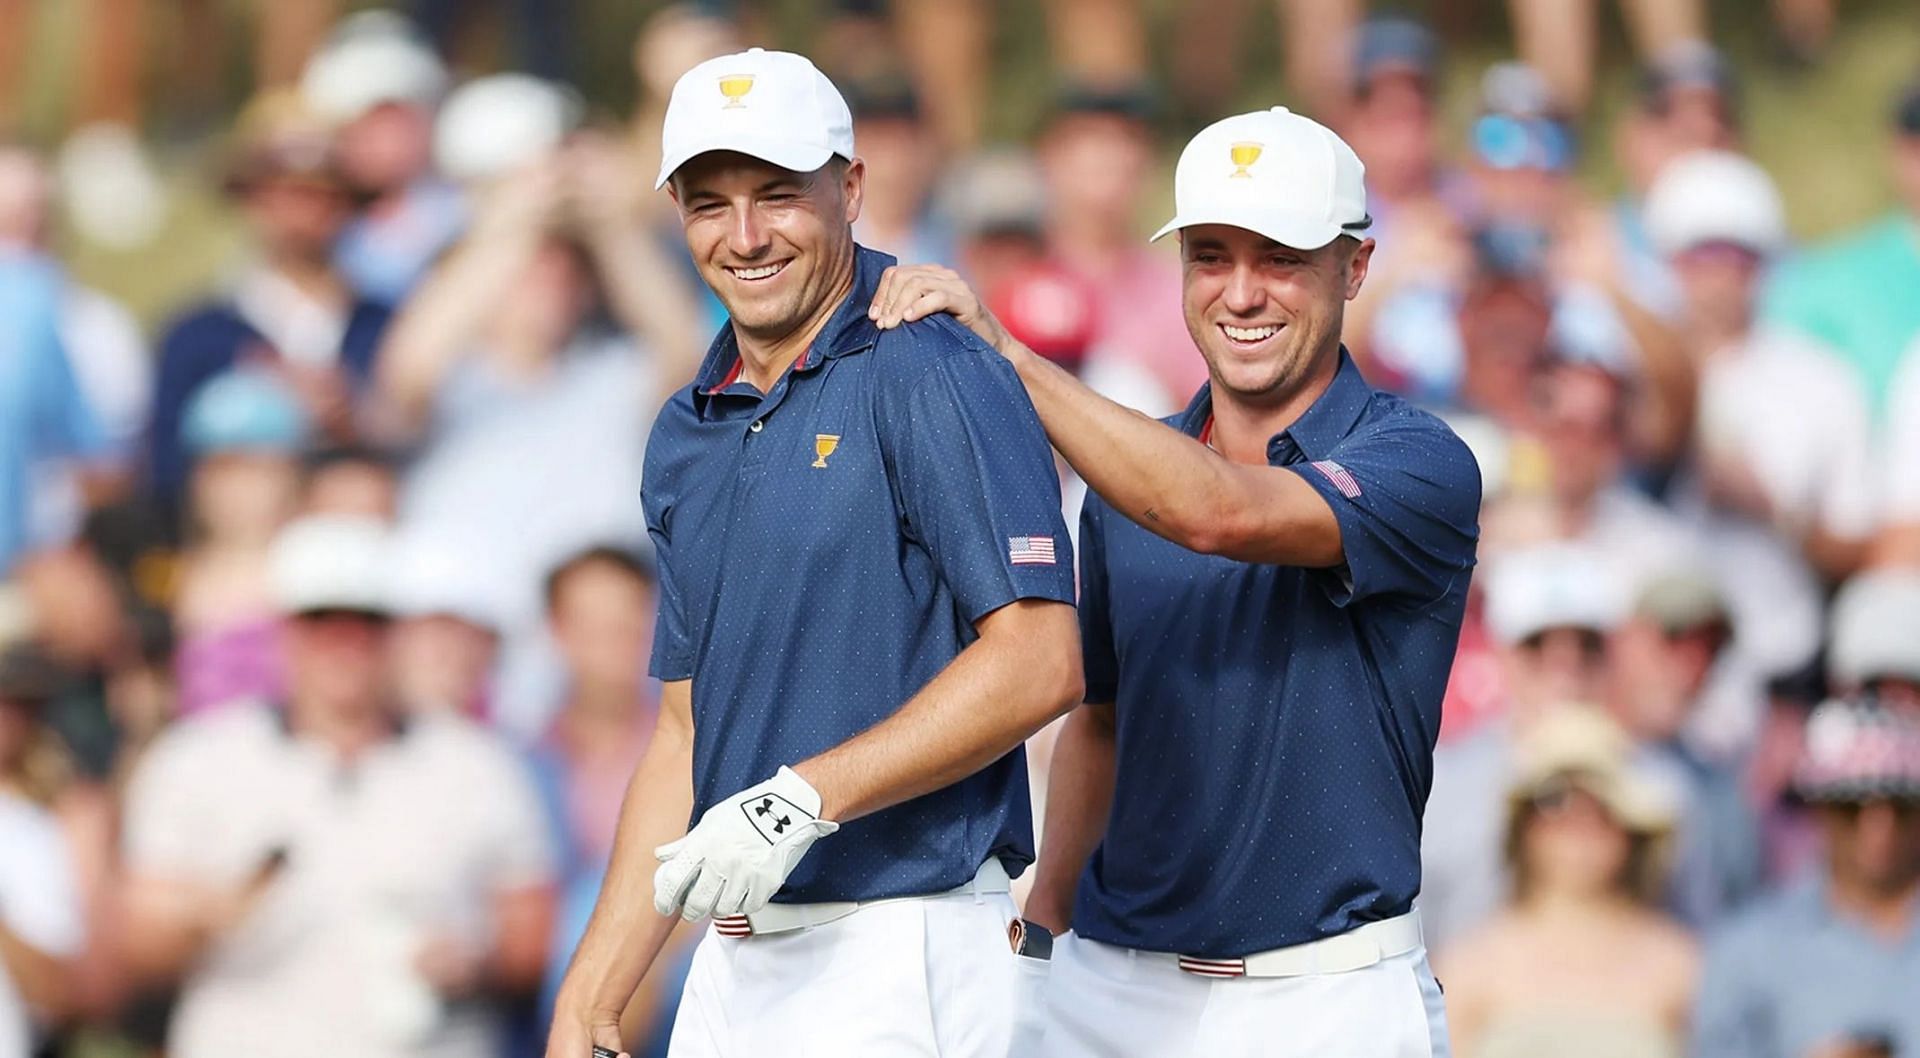 The Spieth-Thomas duo went 4-0 for the winning US team in the Presidents Cup